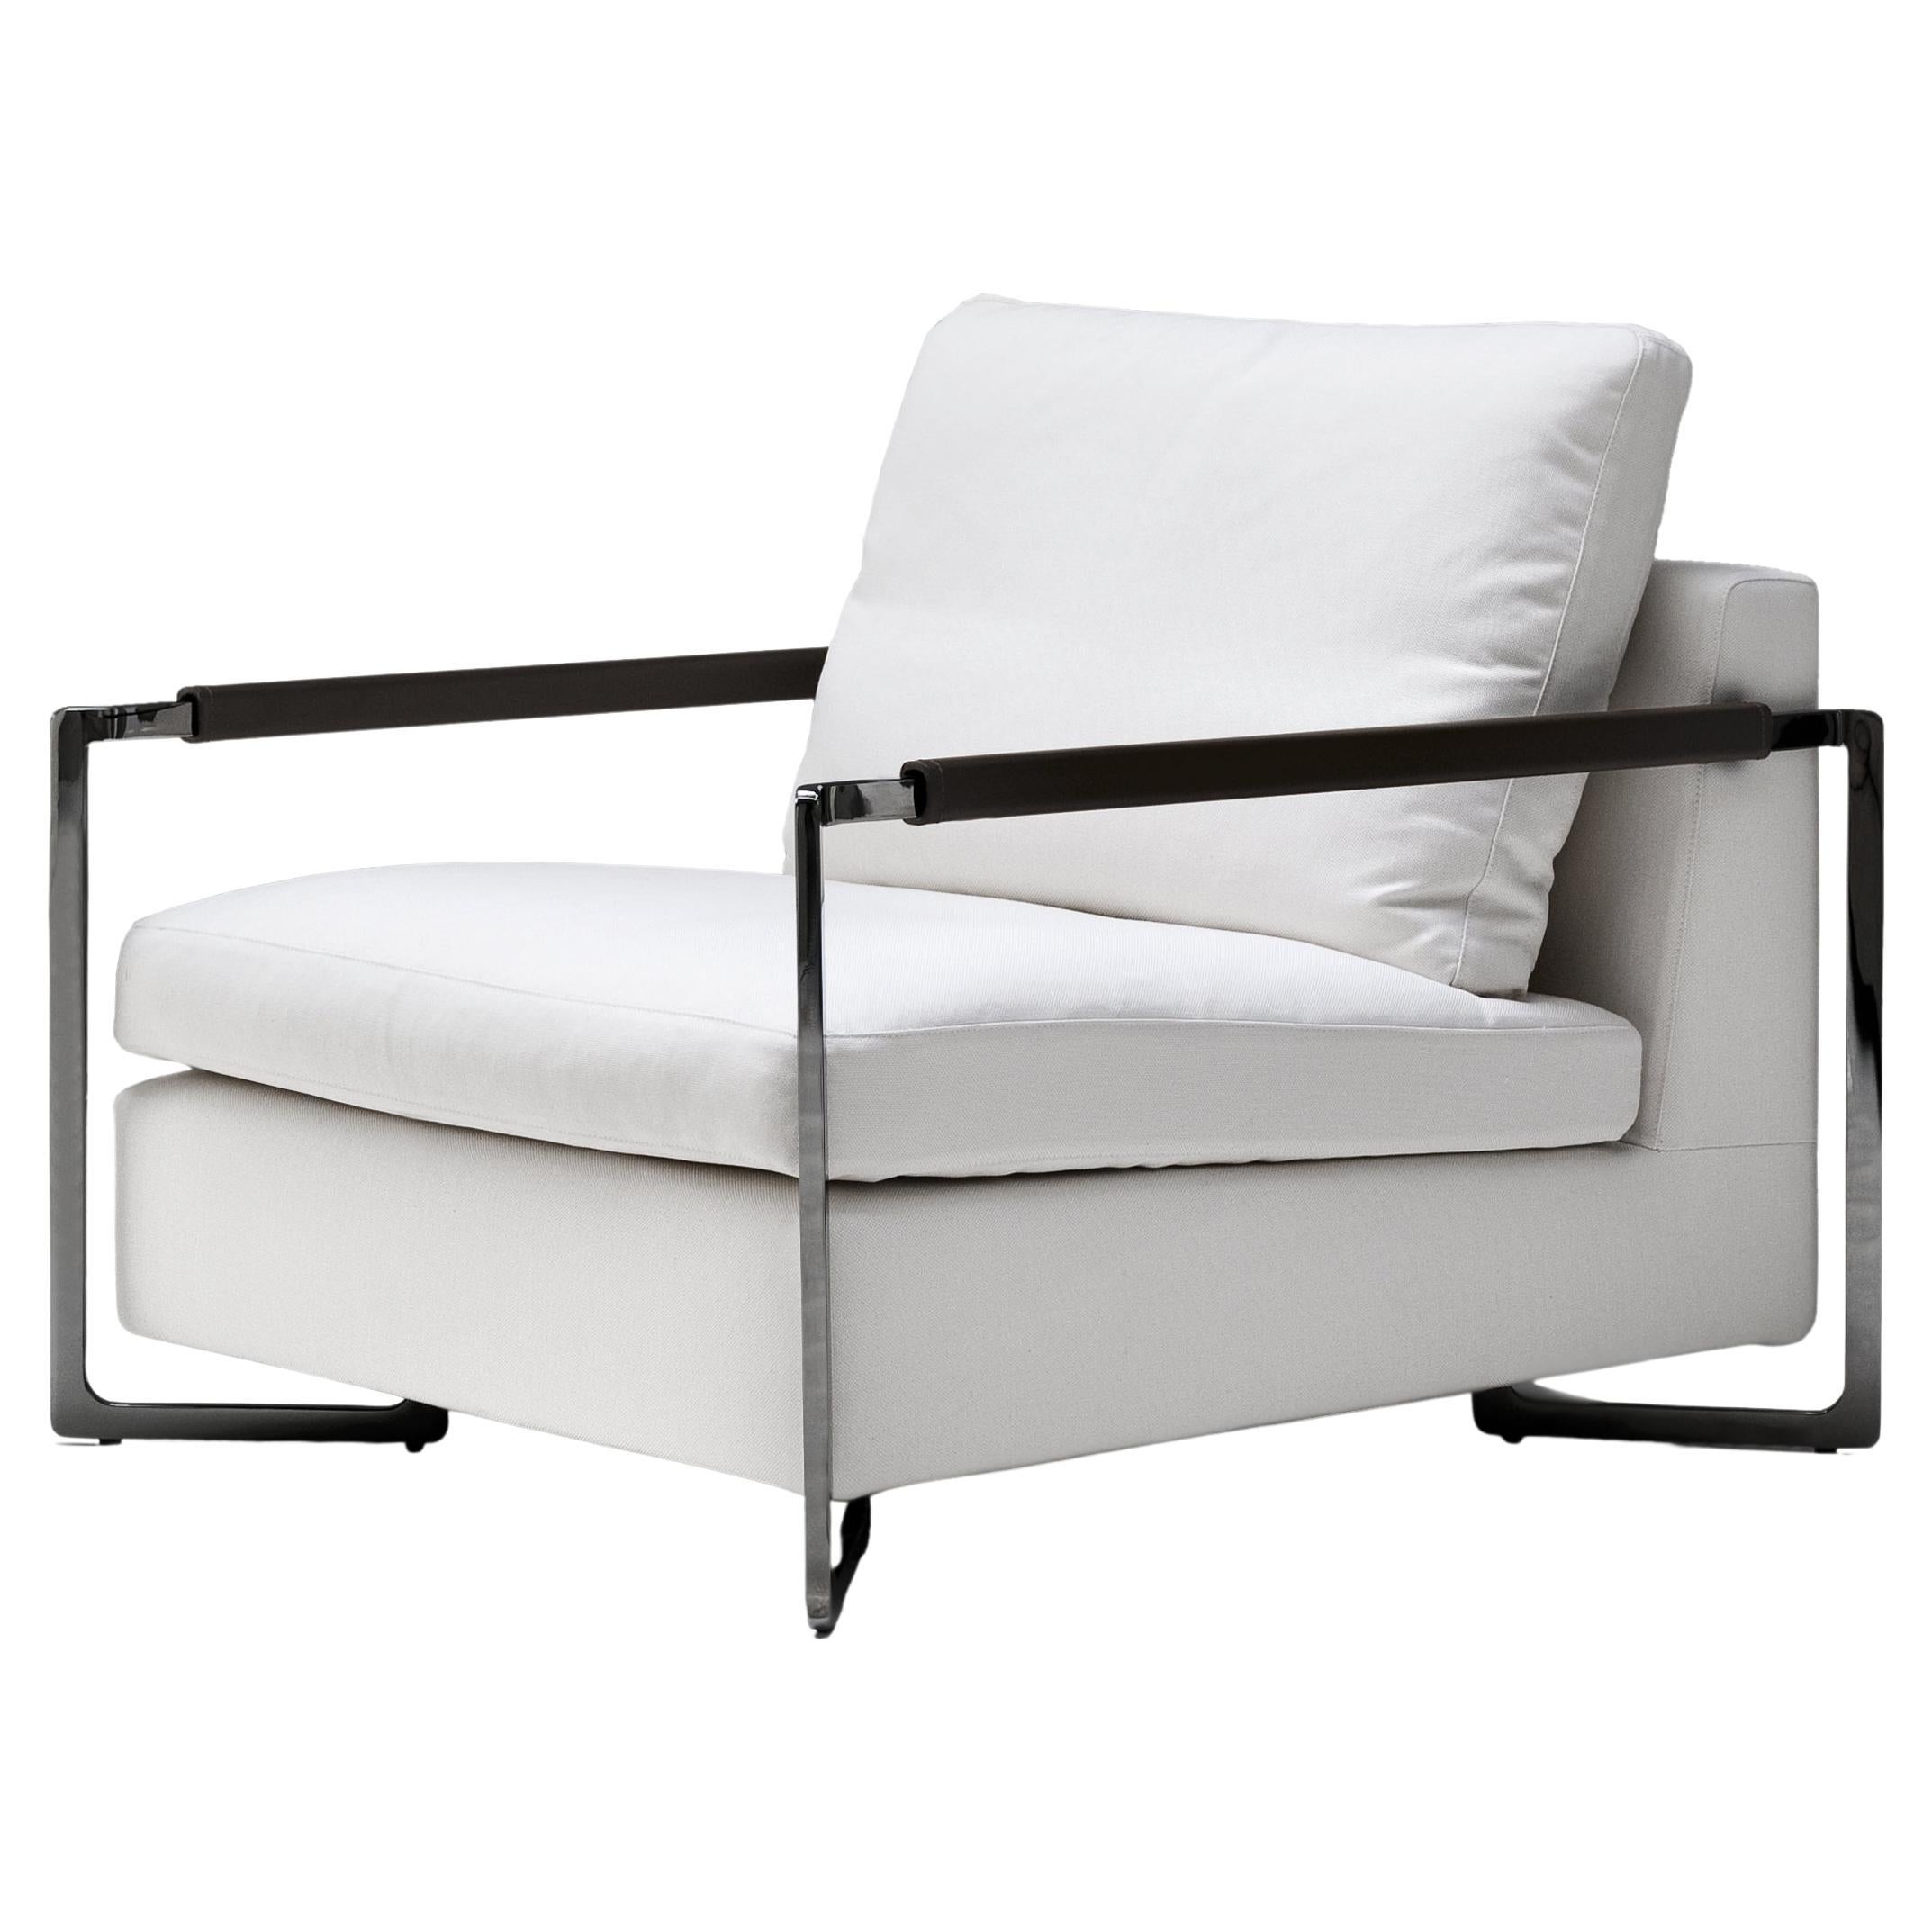 No Logo Light Armchair Vip White Upholstery & Nickel Frame by Sergio Bicego